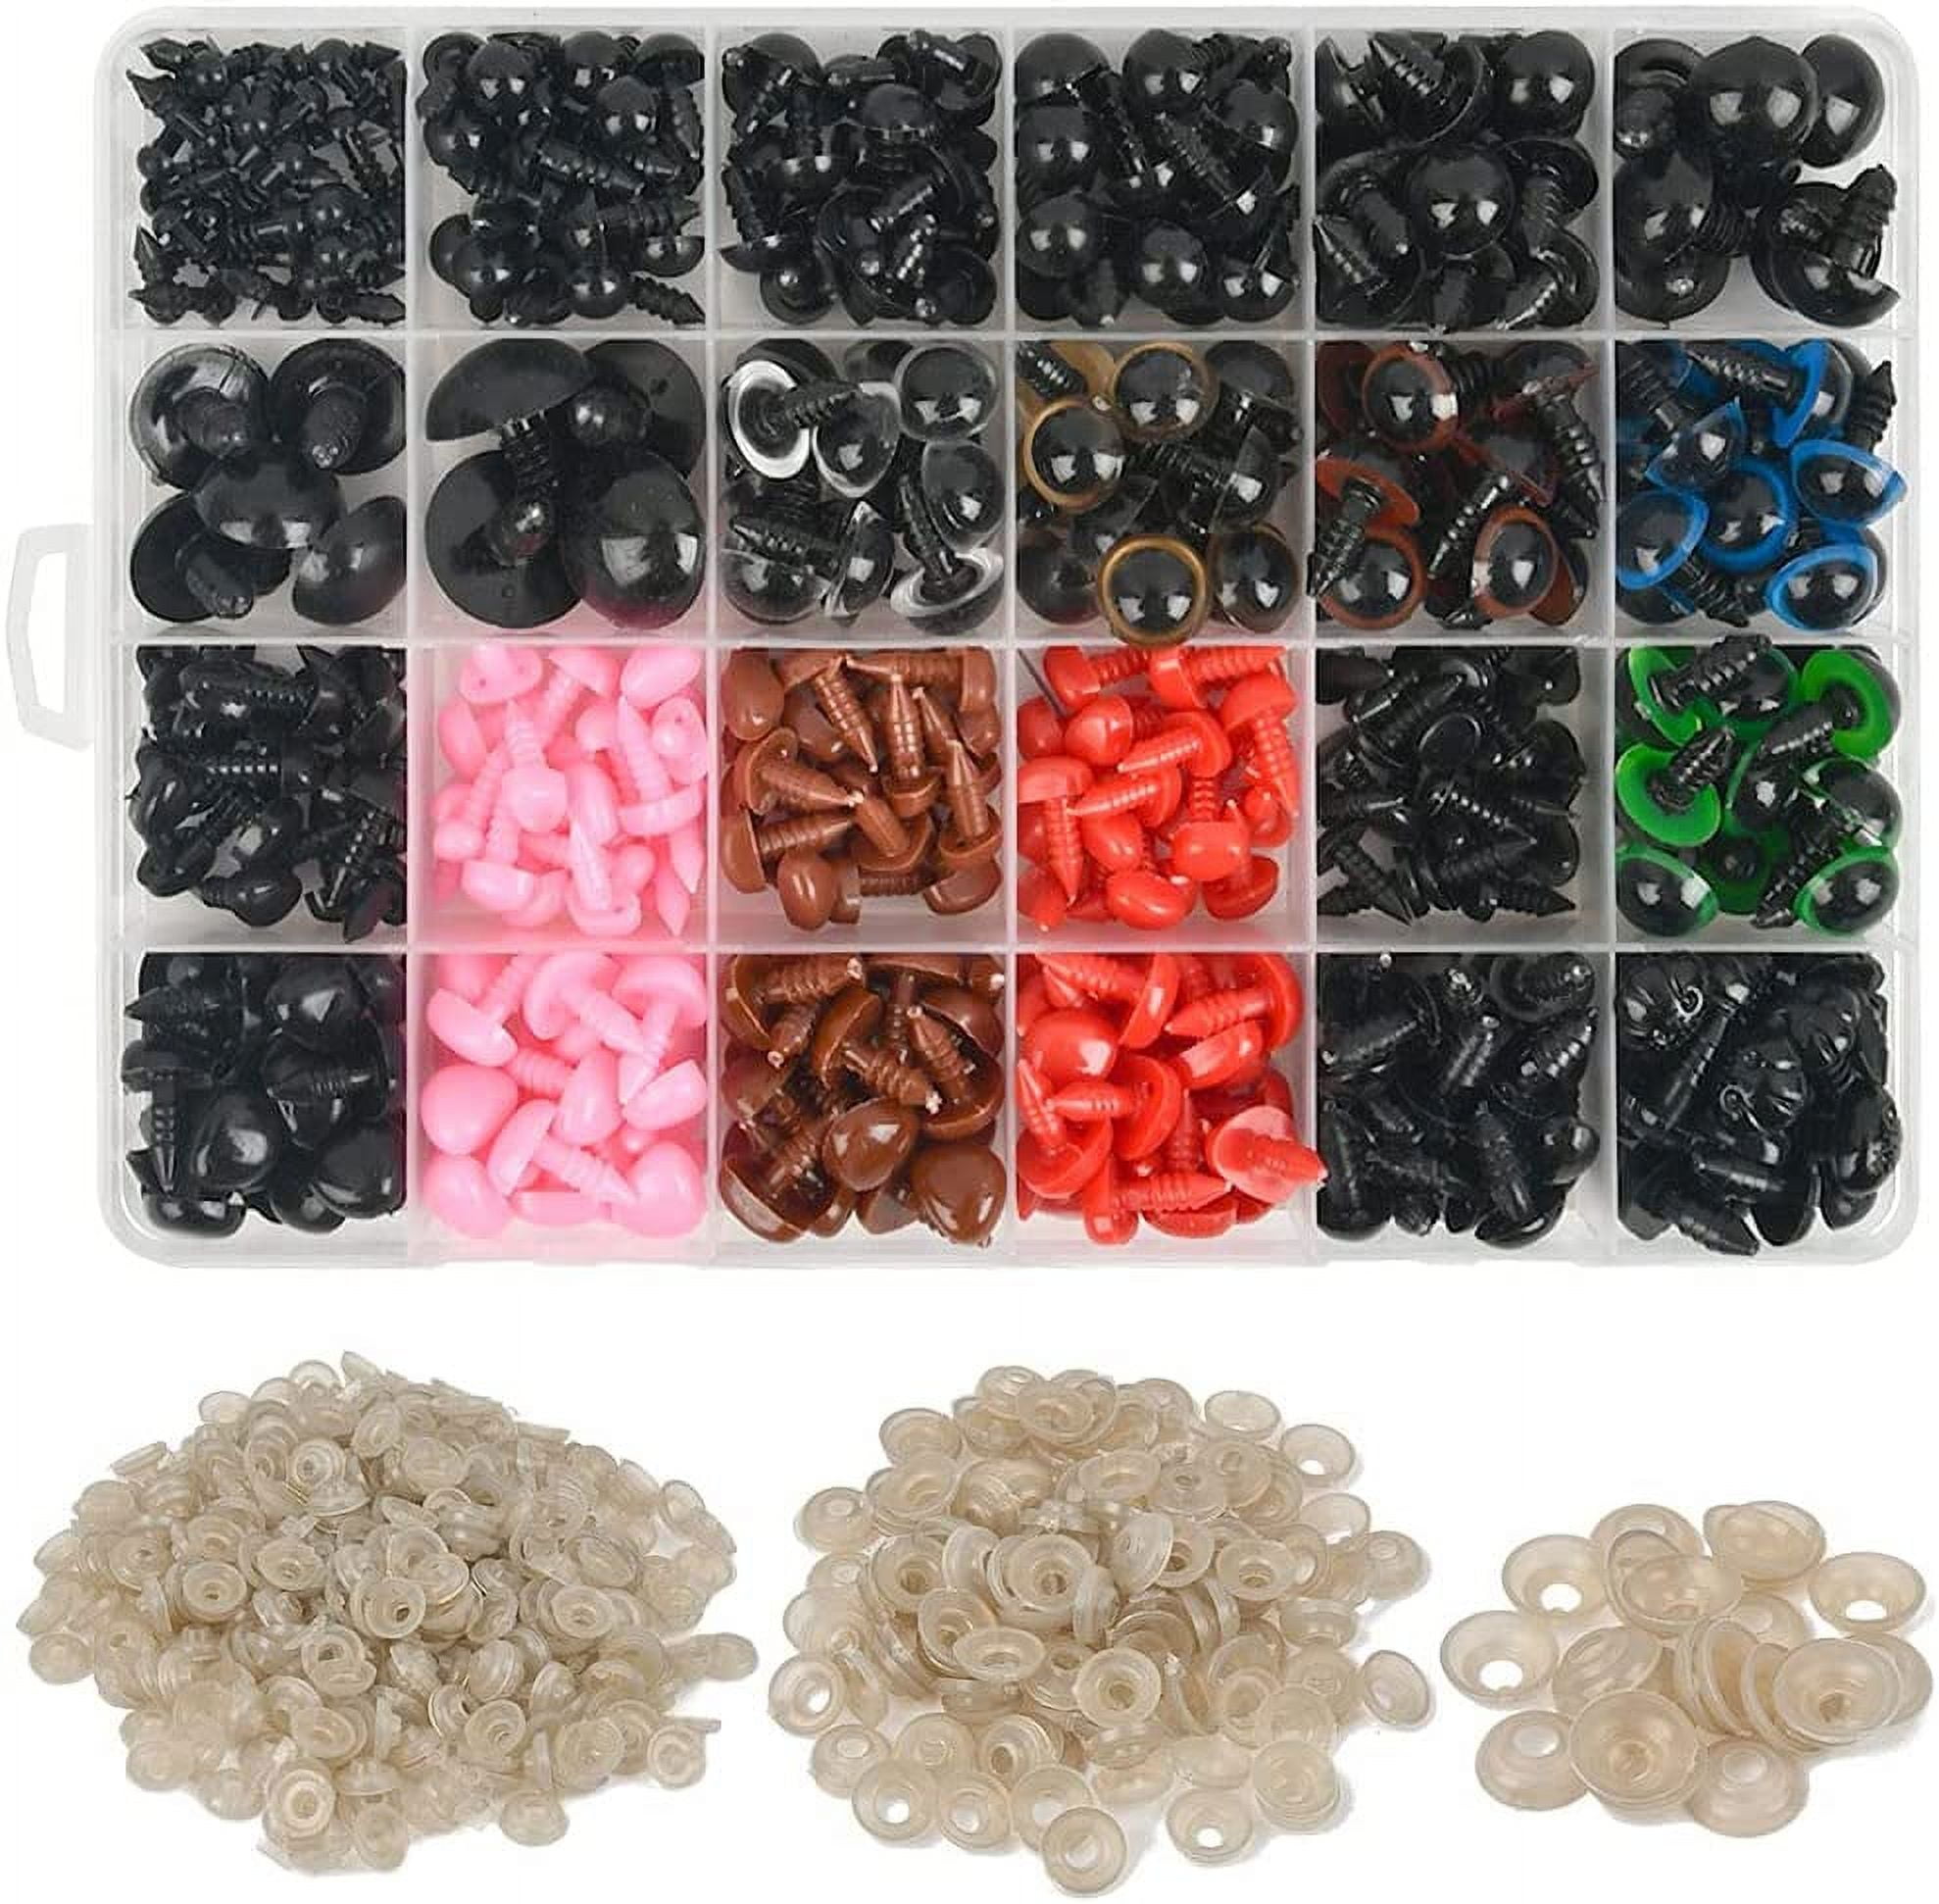 838PCS Colorful Plastic Safety Eyes and Noses with Washers, Craft Doll Eyes,  Black Safety Stuffed Animal Eyes & Nose, Washer Multiple Sizes for Doll,  Teddy Bear, Amigurumi Crafts, Crochet Toy 